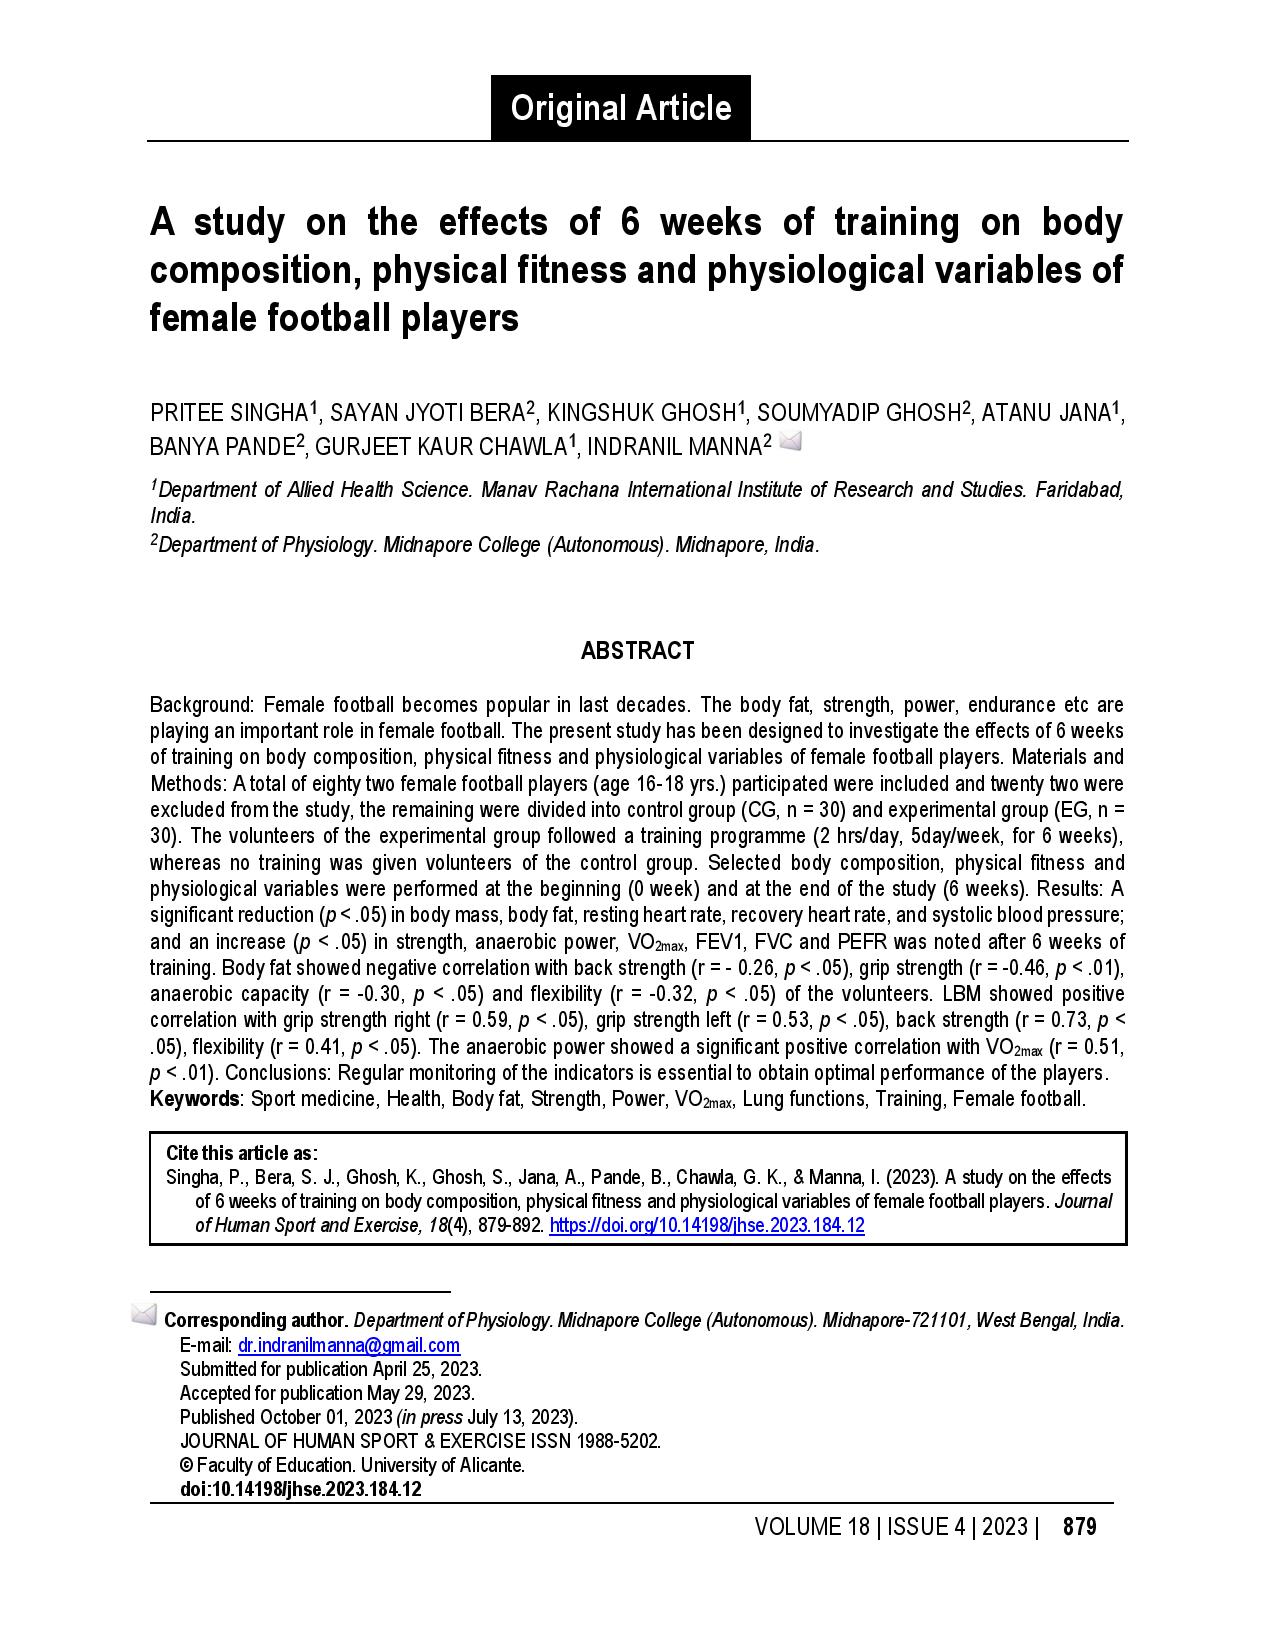 A study on the effects of 6 weeks of training on body composition, physical fitness and physiological variables of female football players